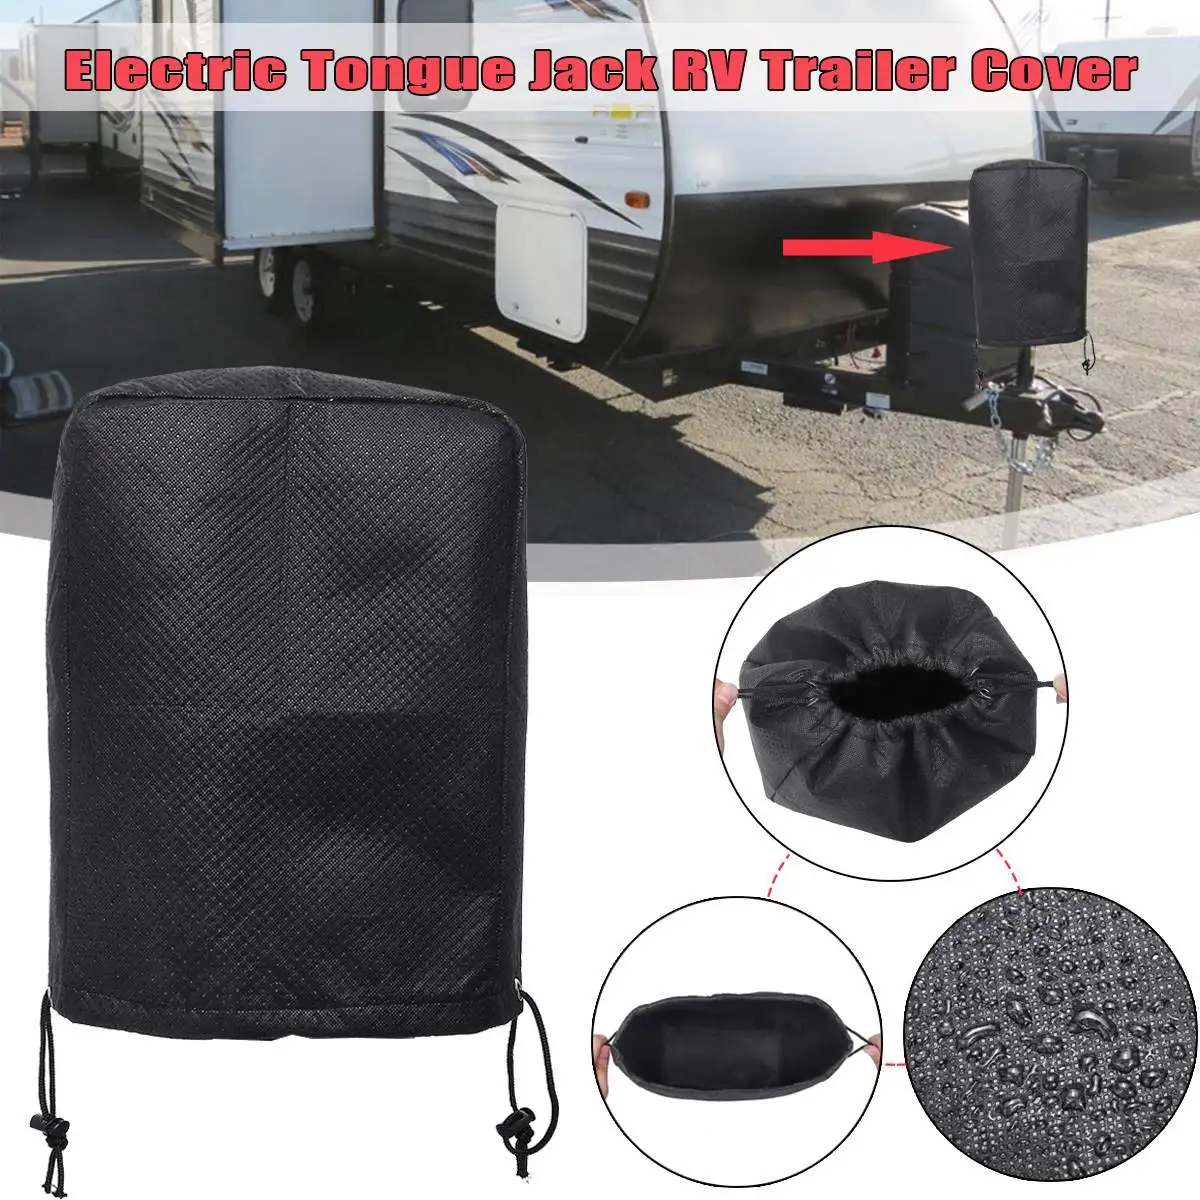 Black AIDIOU Electric Tongue Jack Cover Waterproof Leather Material Universal RV Power Tongue Trailer Jack Cover Easy Cover RV Travel Trailer Jack Protective Cover Size 9L X 6W X 18H Inches 